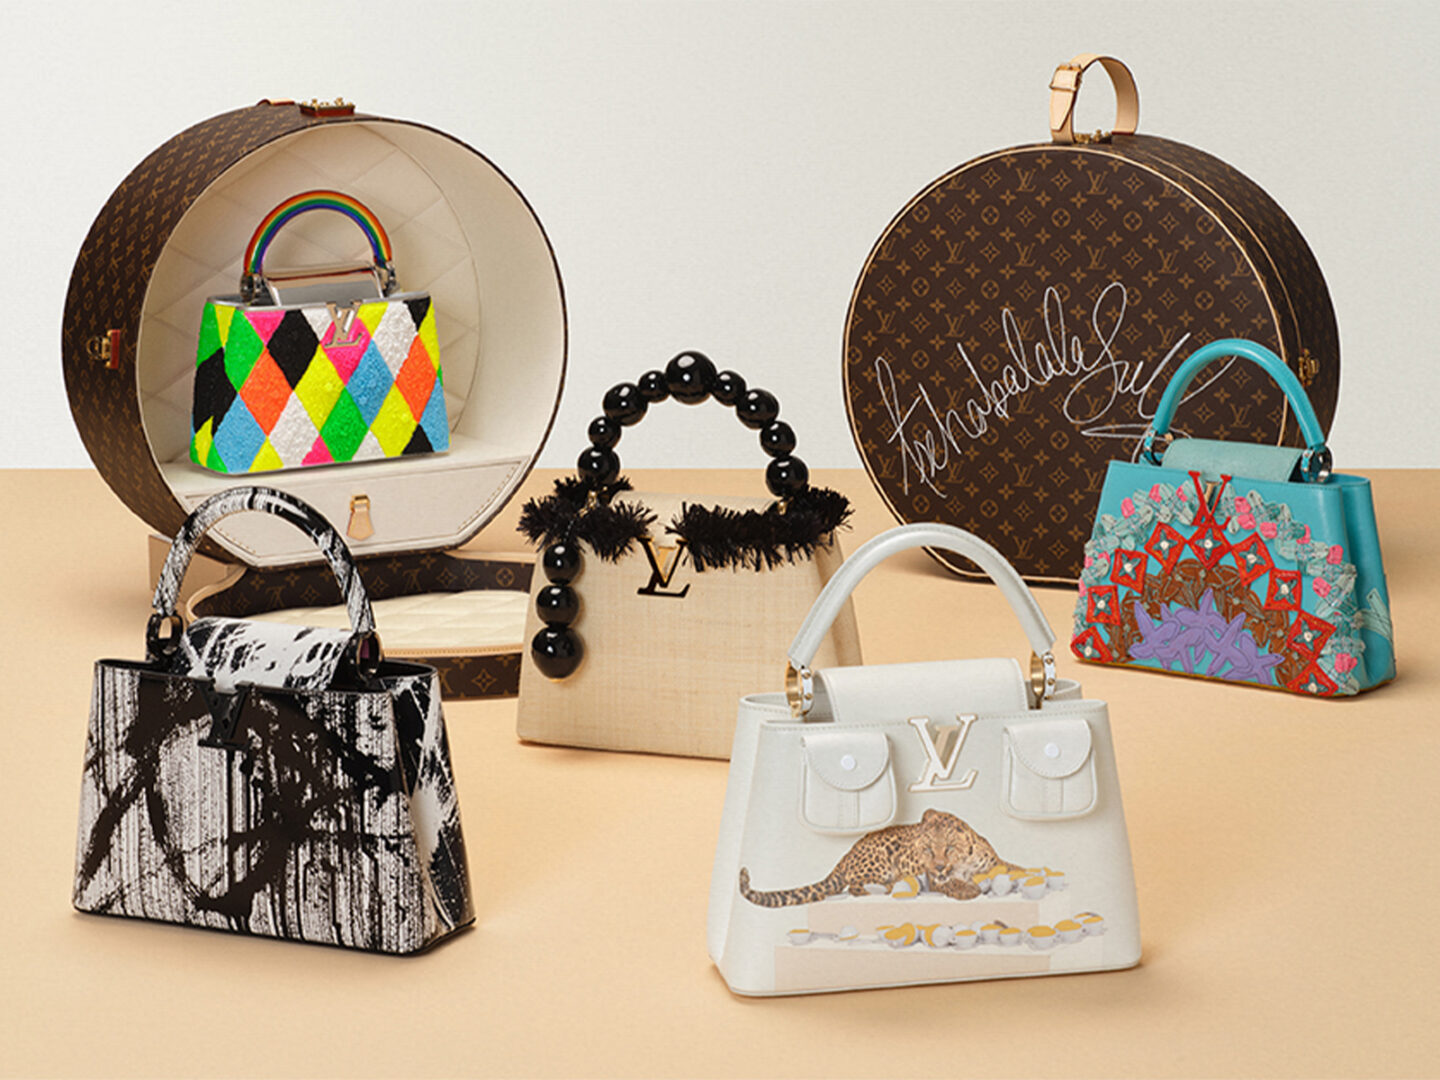 All about the charity auction involving Louis Vuitton and Sotheby’s